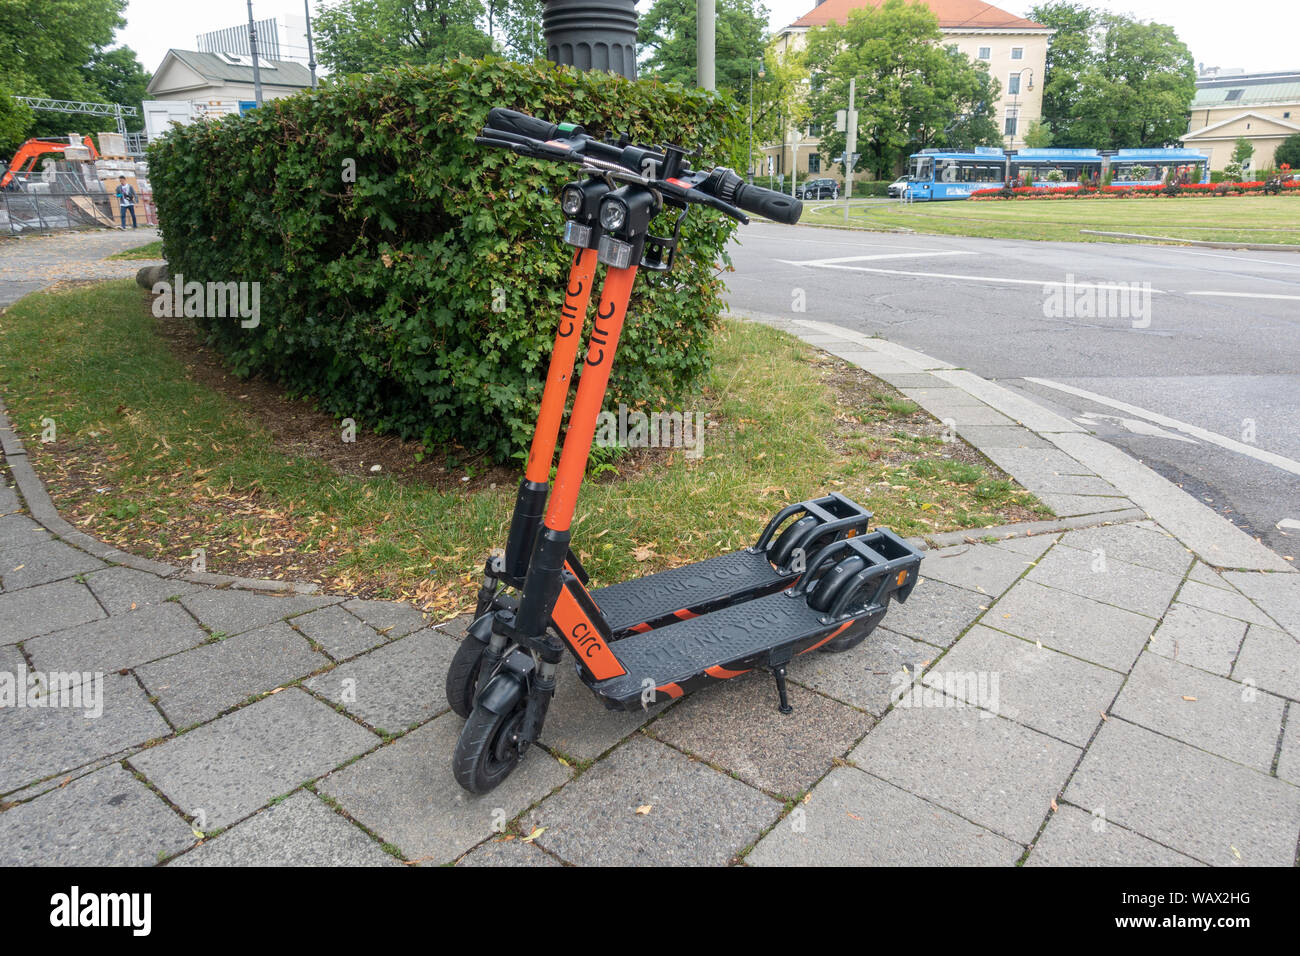 A pair of Circ e-scooters on a roadside in Munich, Bavaria, Germany. Stock Photo